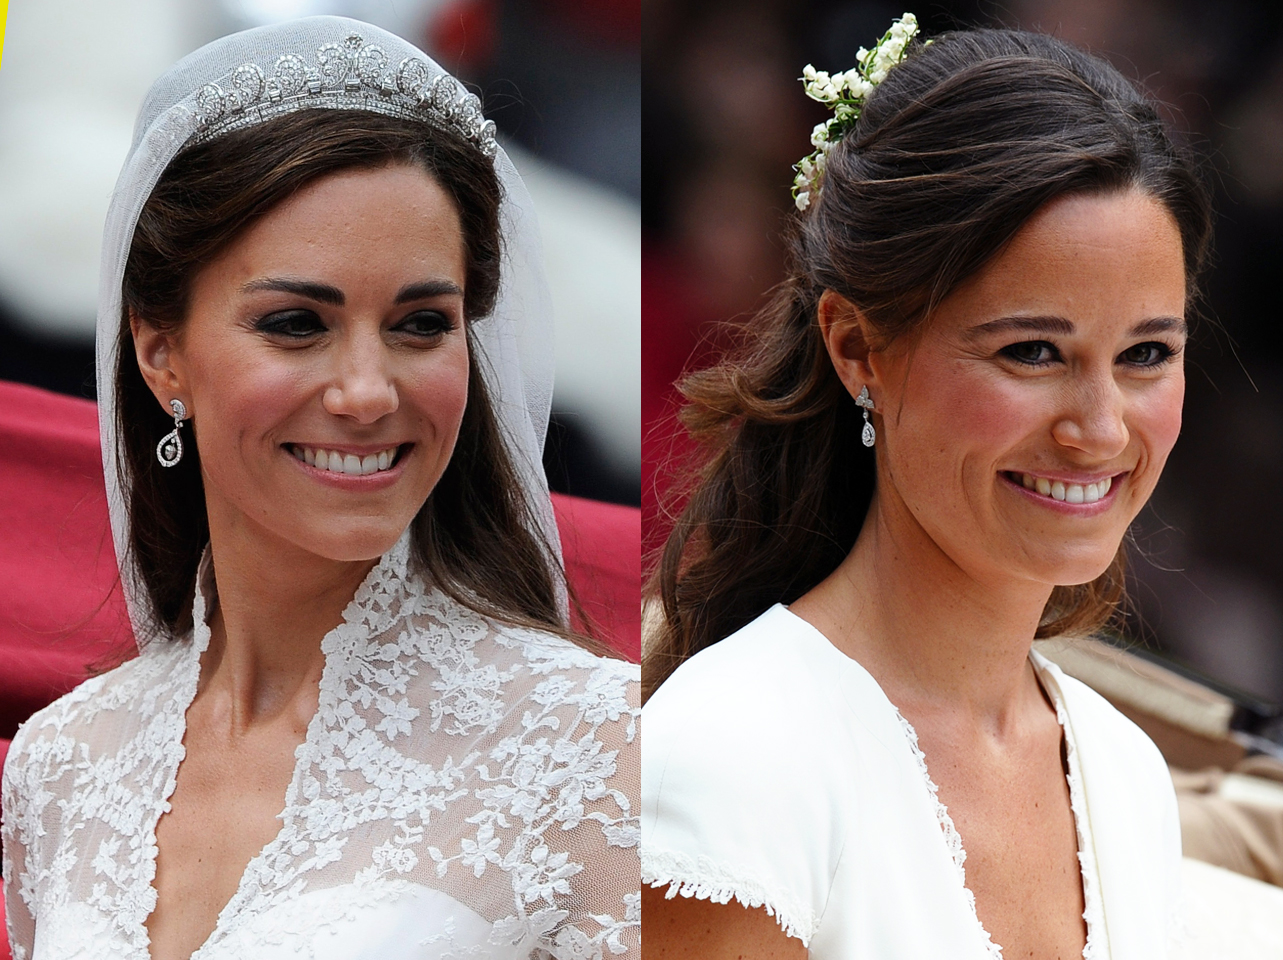 Kate Middleton and Pippa Middleton during Kate's wedding on April 29, 2011, in London, England. | Source: Getty Images